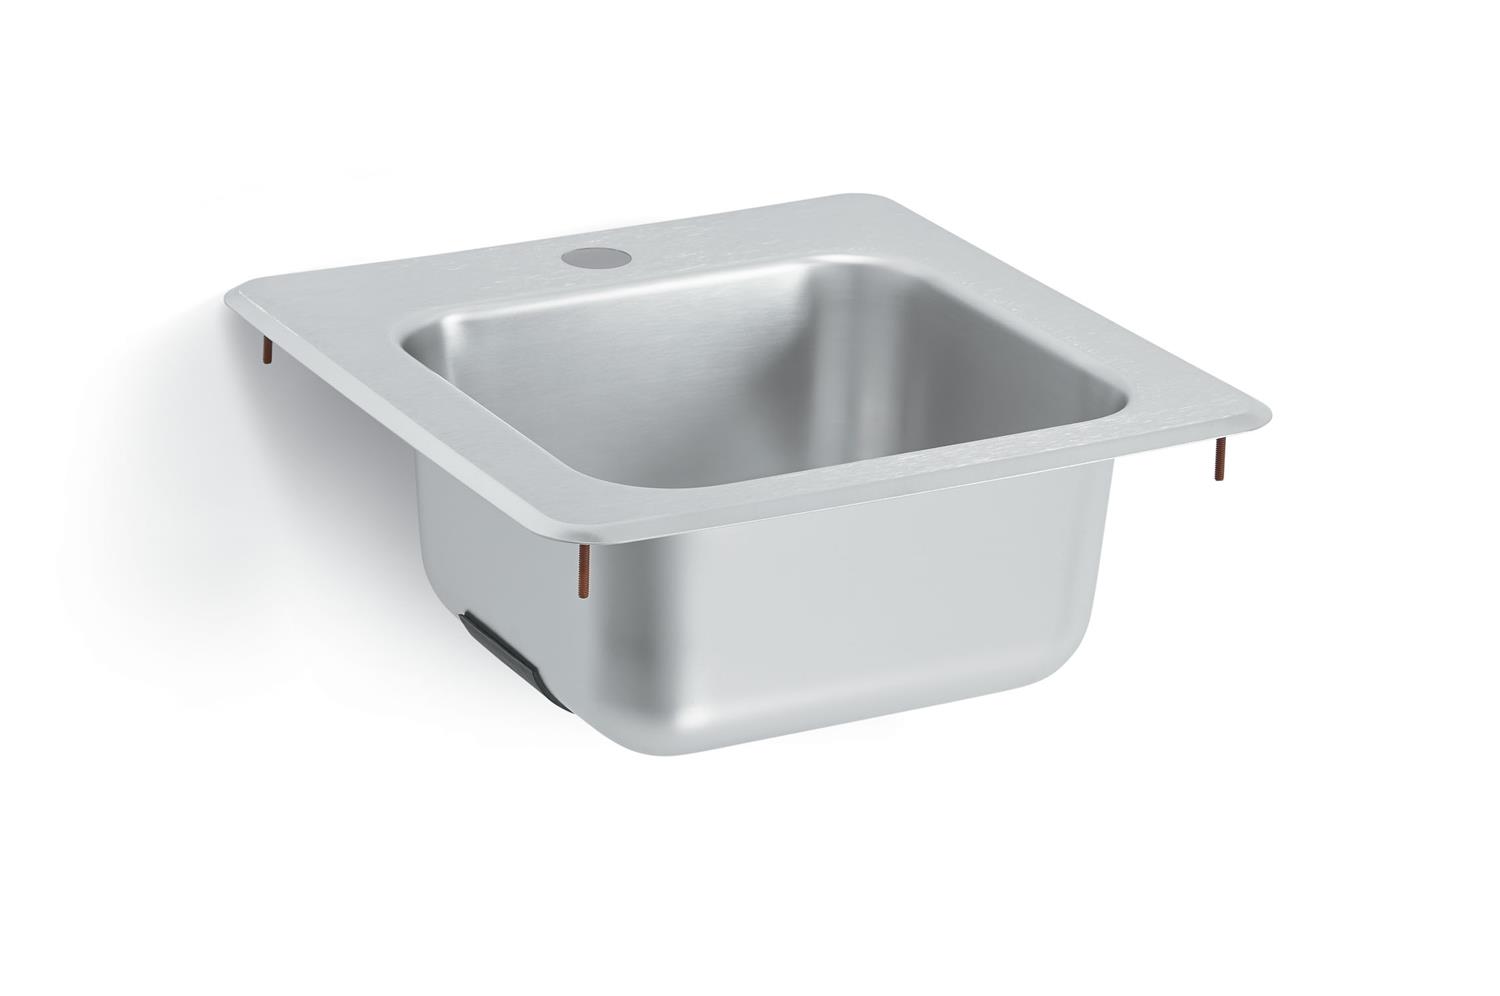 Vollrath 1551 Sink for use with electronic mixing faucet (not included)